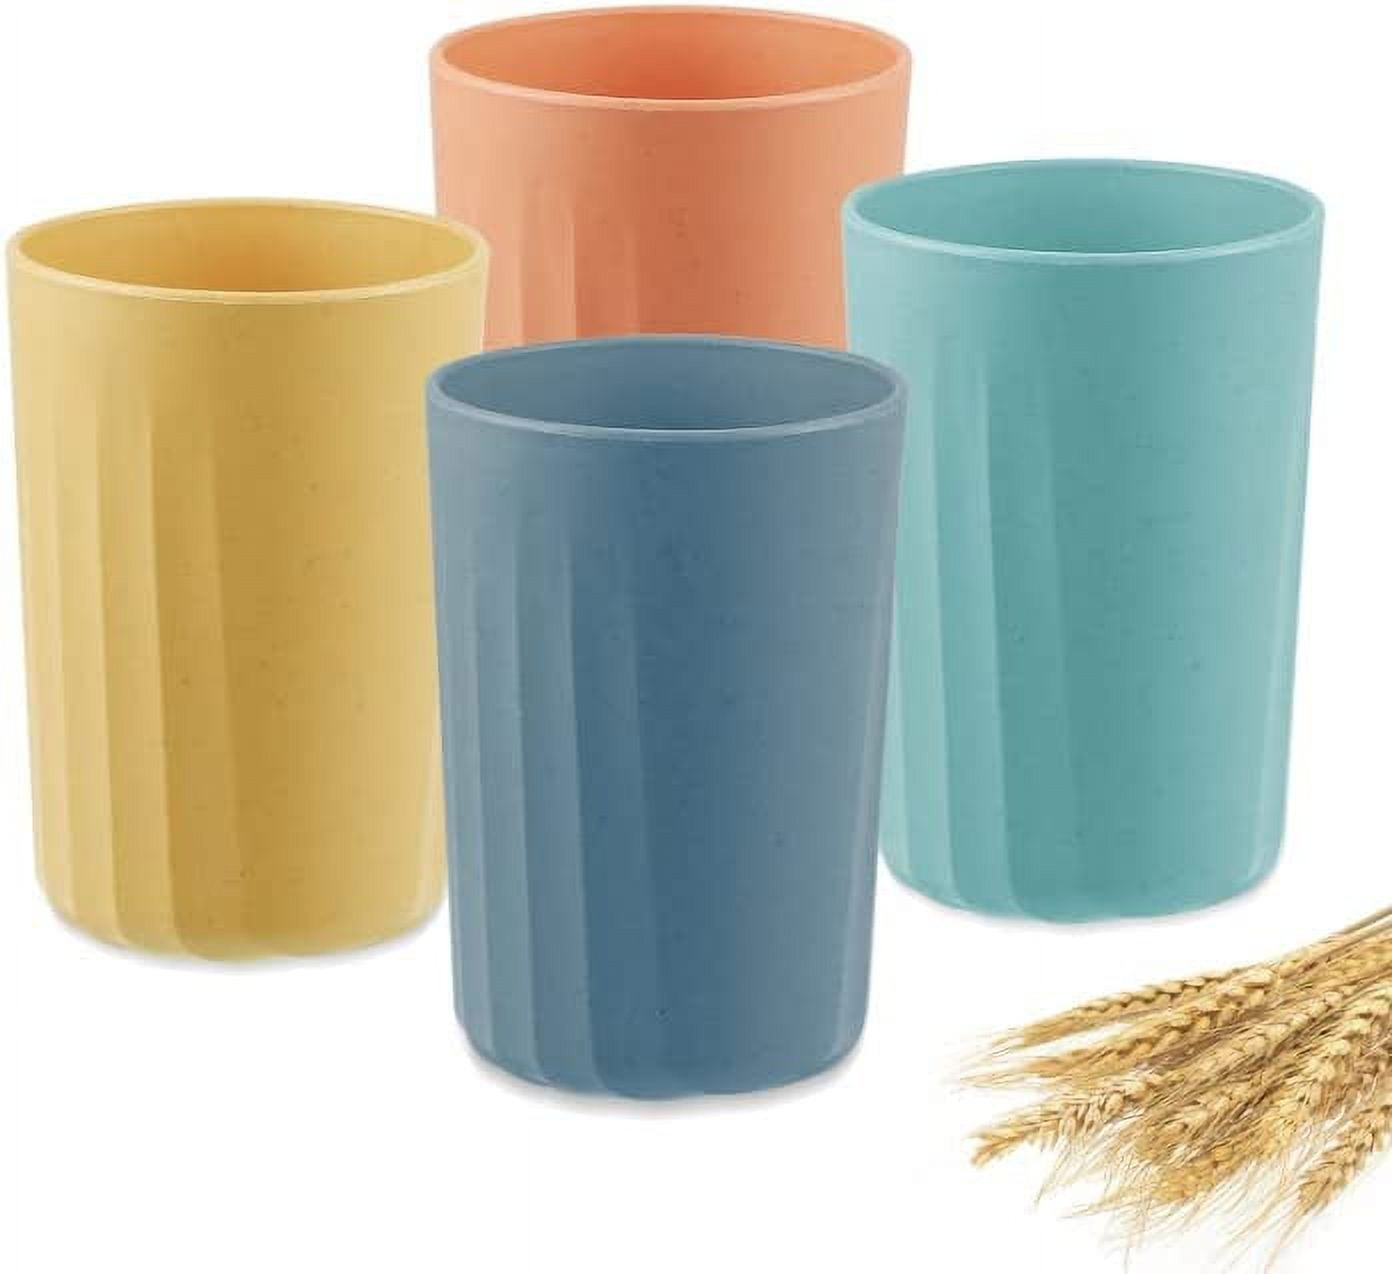 Okuna Outpost 6 Pack Wheat Straw Cups For Coffee, Tea, Milk, Juice,  Reusable And Dishwasher/microwave-safe, 3 Colors (13.8 Ounces, Unbreakable)  : Target